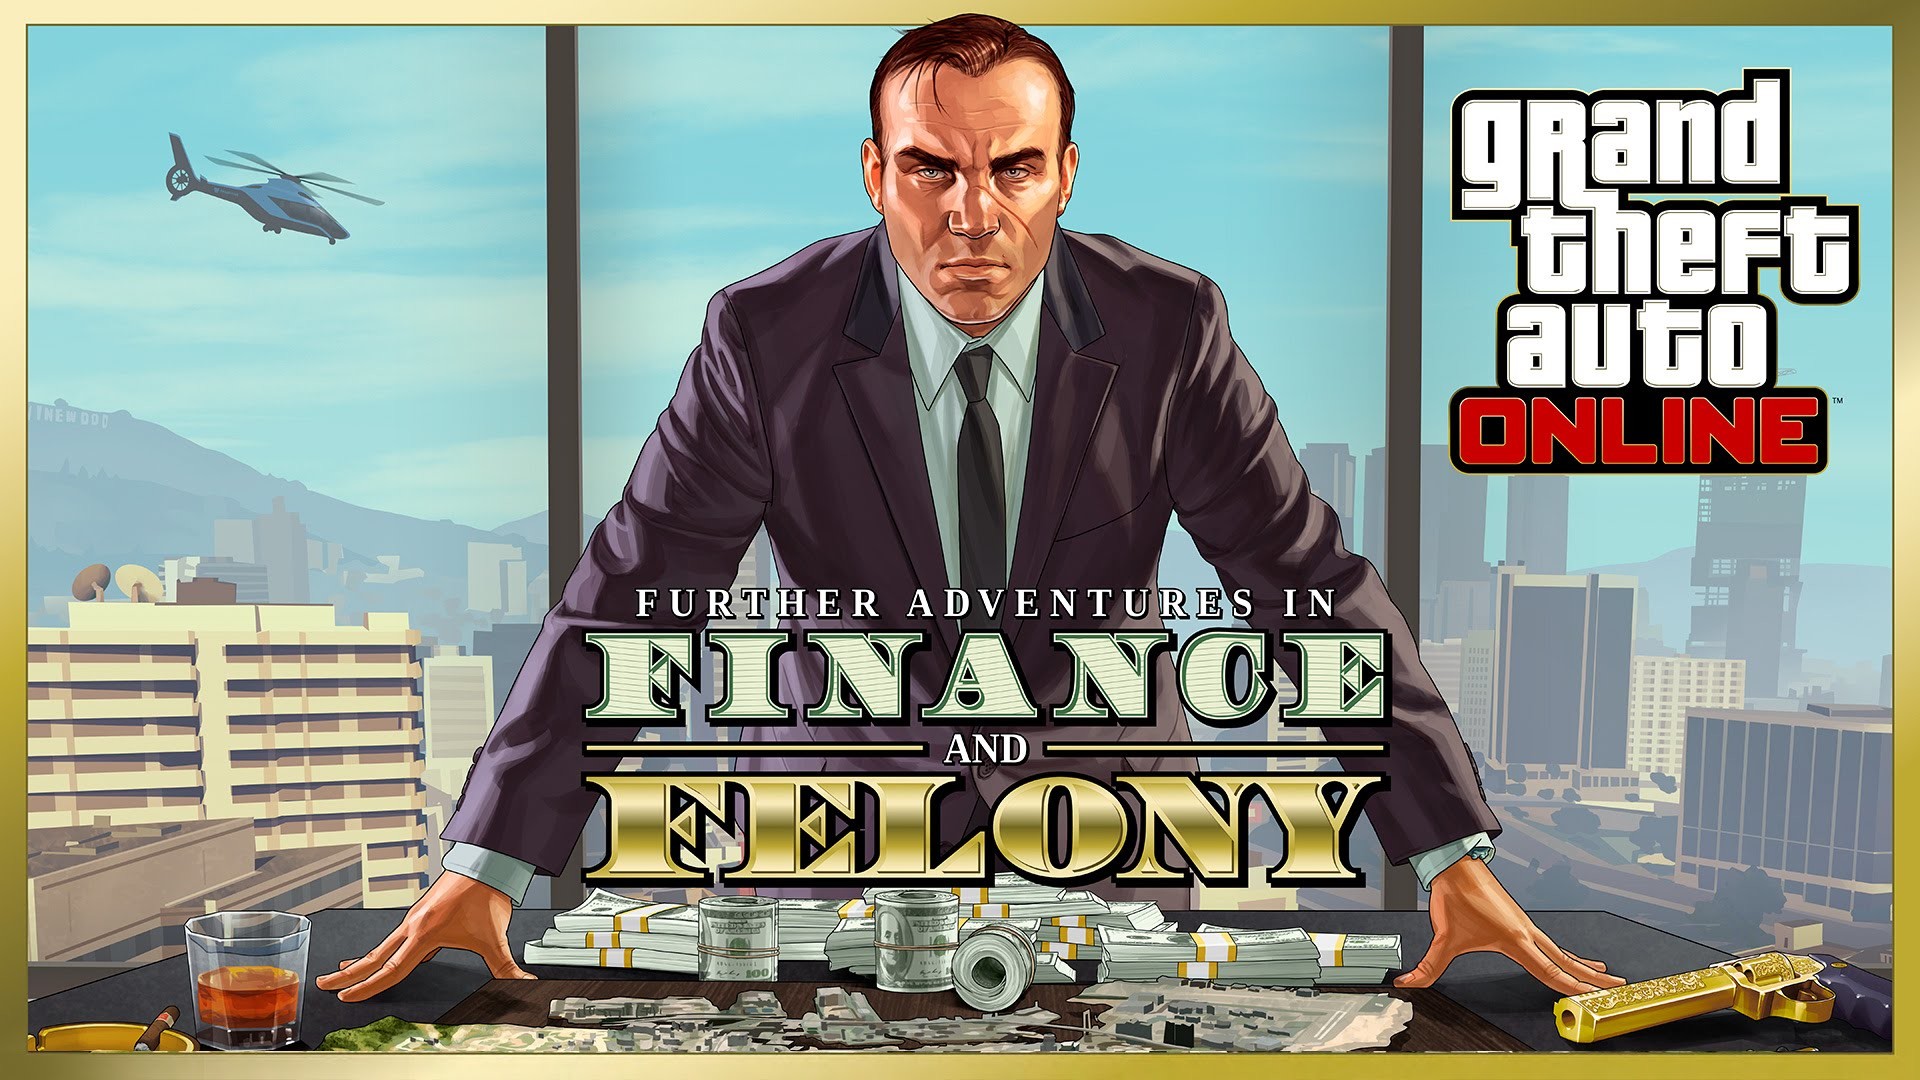 1920x1080 GTA Online: Further Adventures in Finance and Felony Trailer